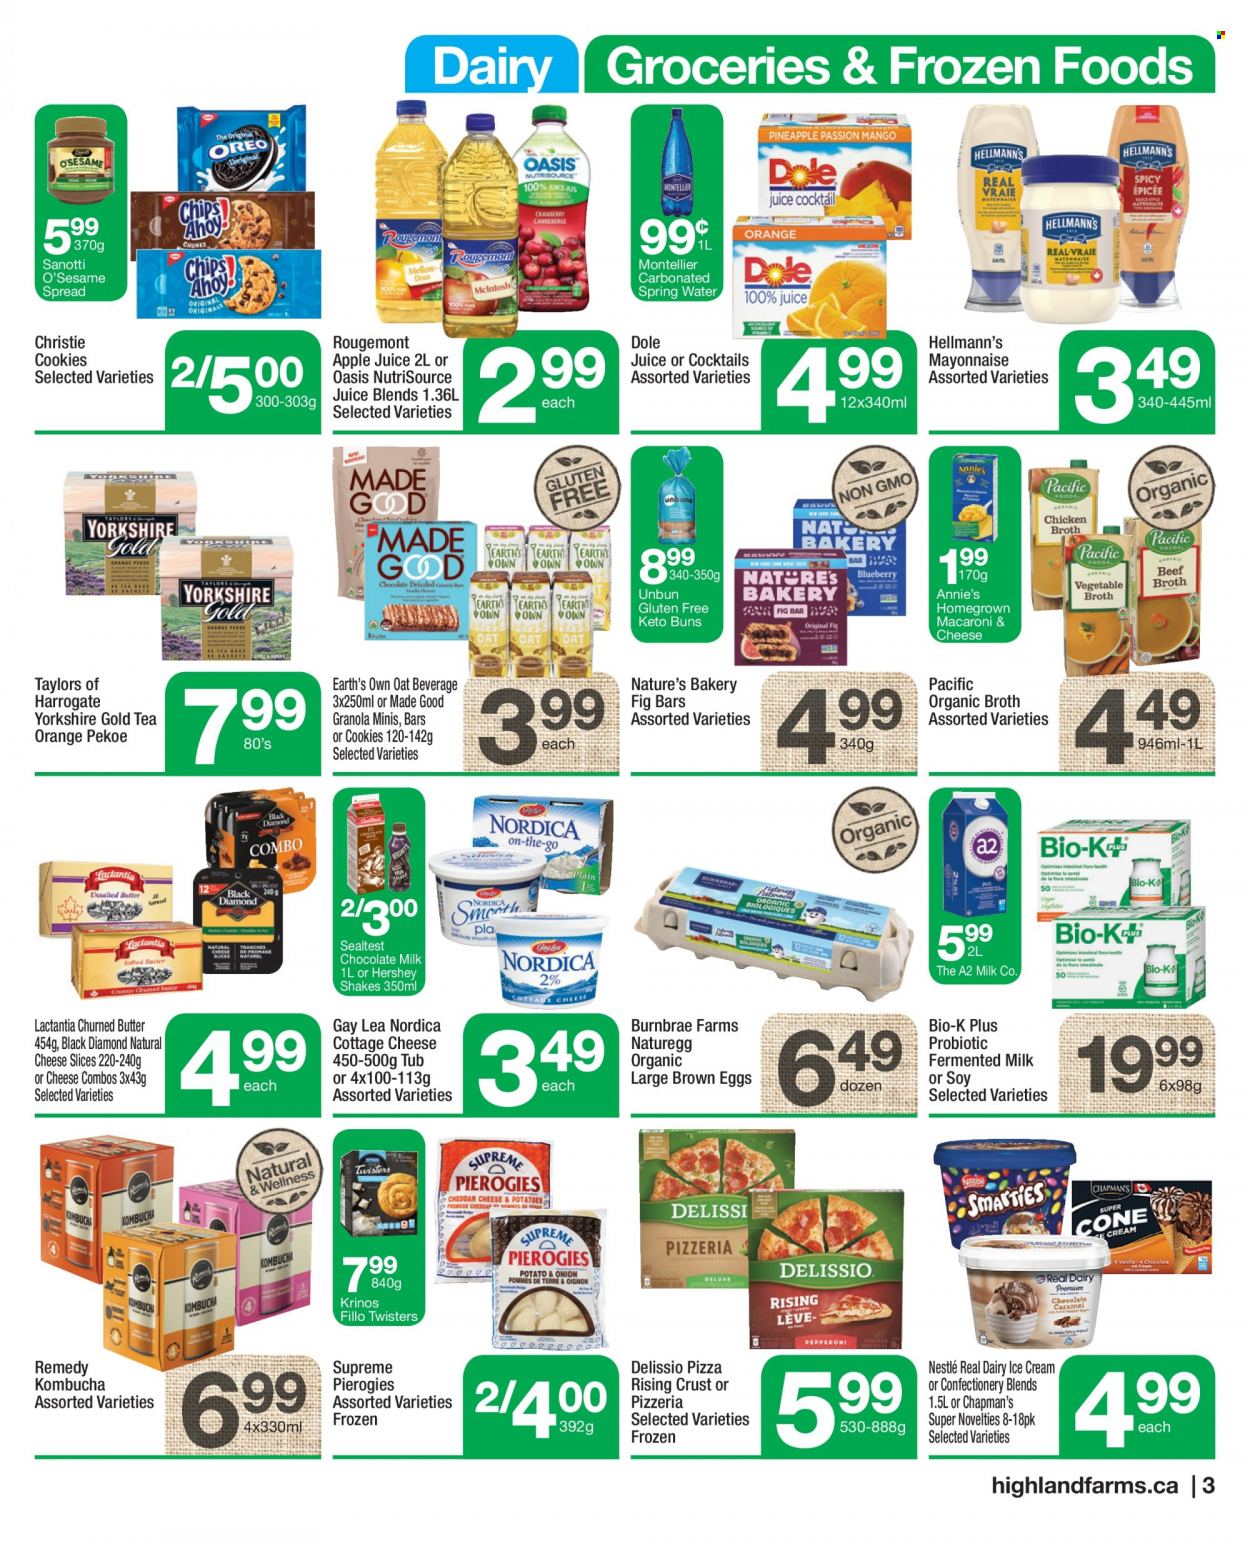 thumbnail - Highland Farms Flyer - September 16, 2021 - September 22, 2021 - Sales products - buns, Dole, macaroni & cheese, pizza, Annie's, cottage cheese, sliced cheese, milk, shake, eggs, butter, mayonnaise, Hellmann’s, ice cream, cookies, milk chocolate, oats, broth, apple juice, juice, spring water, kombucha, tea, Nestlé, granola, oranges. Page 3.